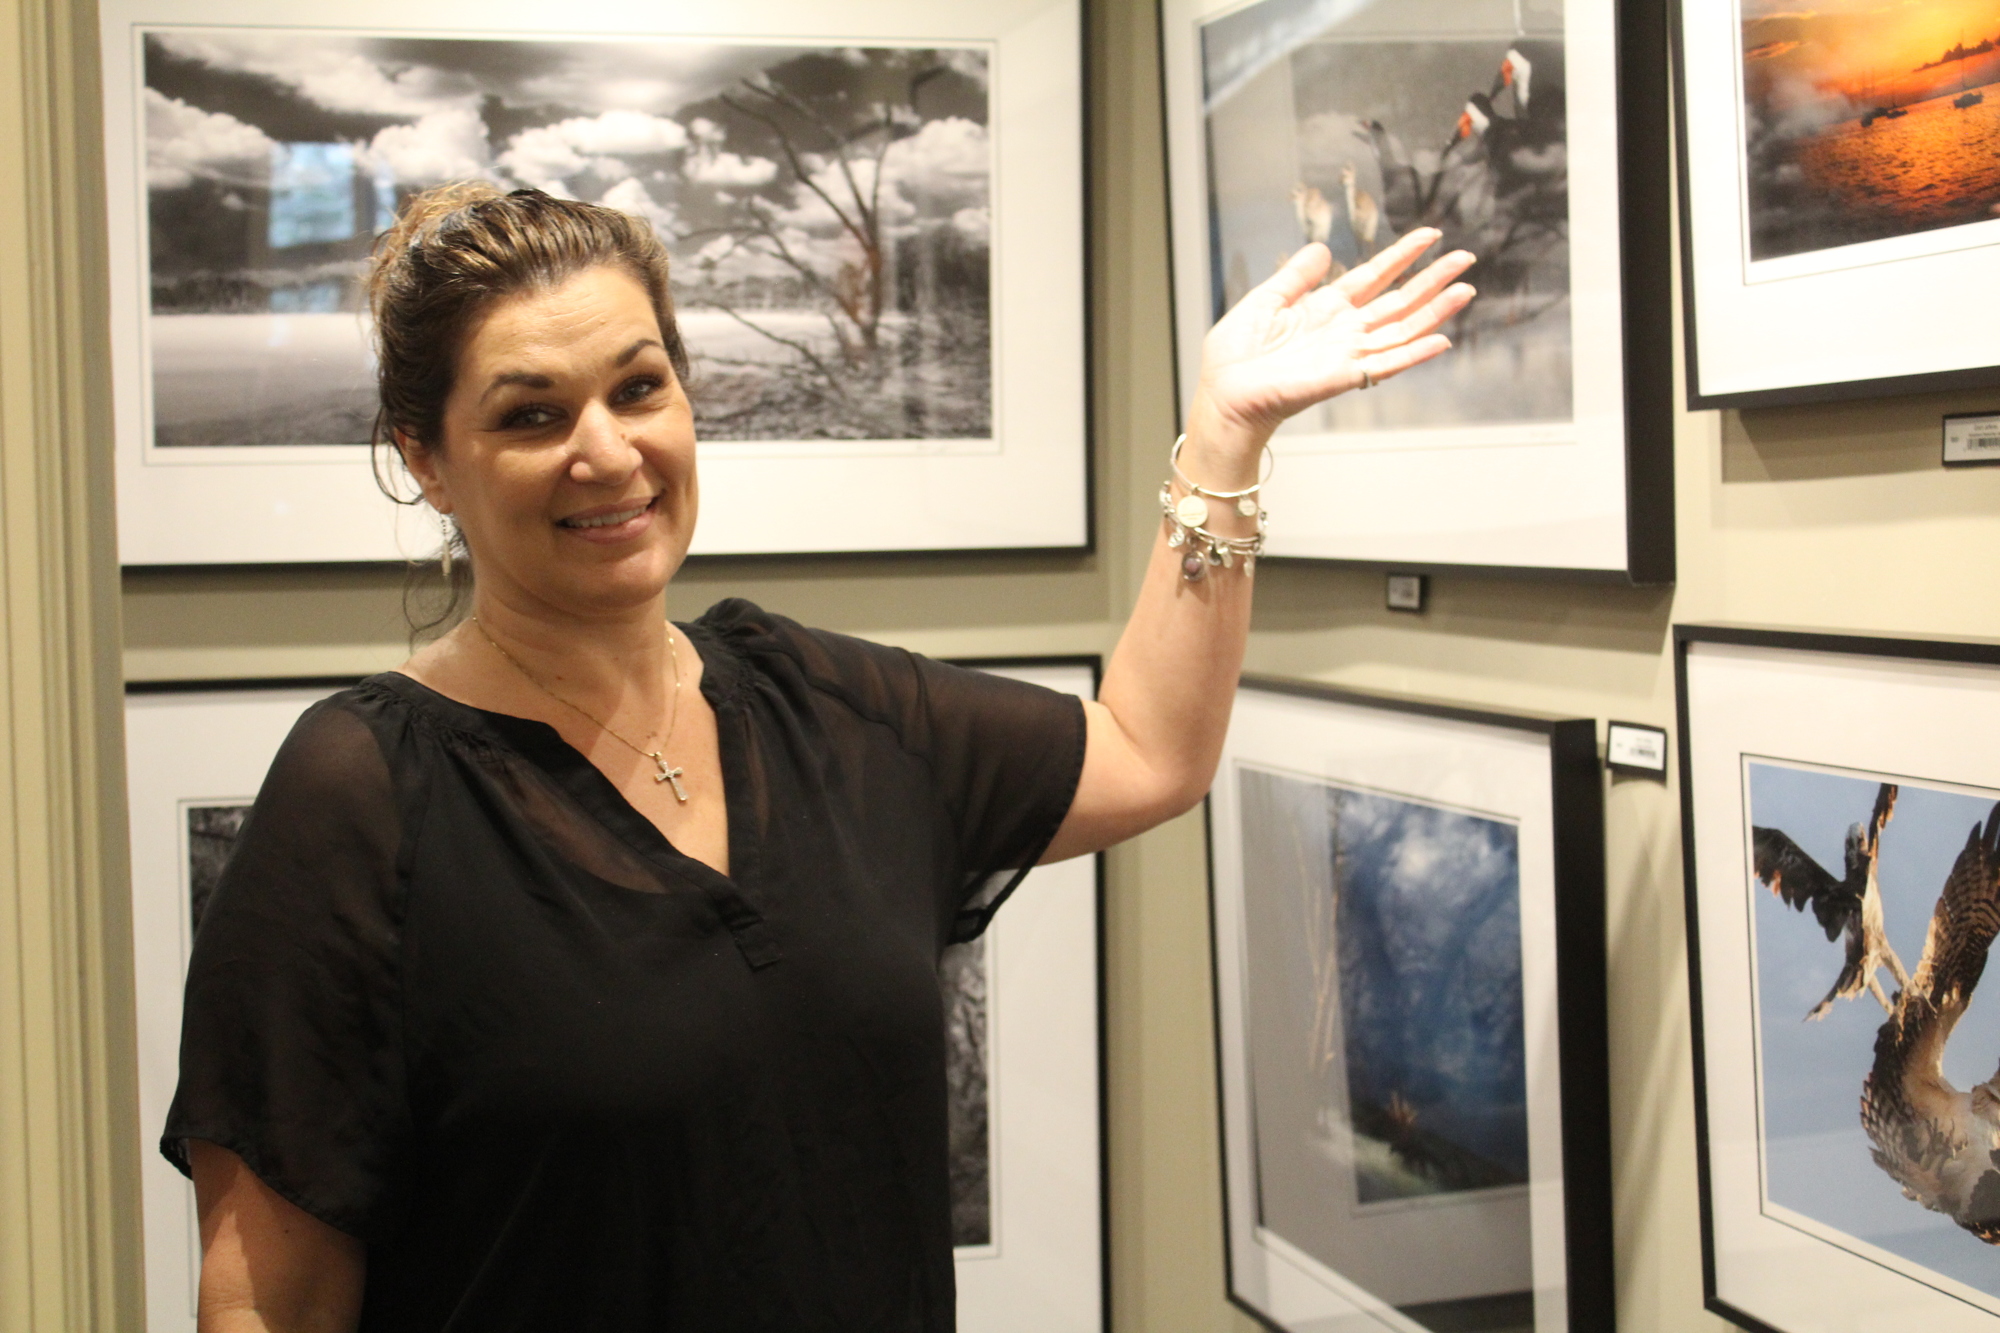 J&J Gallery Owner Jennifer Perry brought an art gallery with a variety of different art, including photography, to Main Street at Lakewood Ranch.